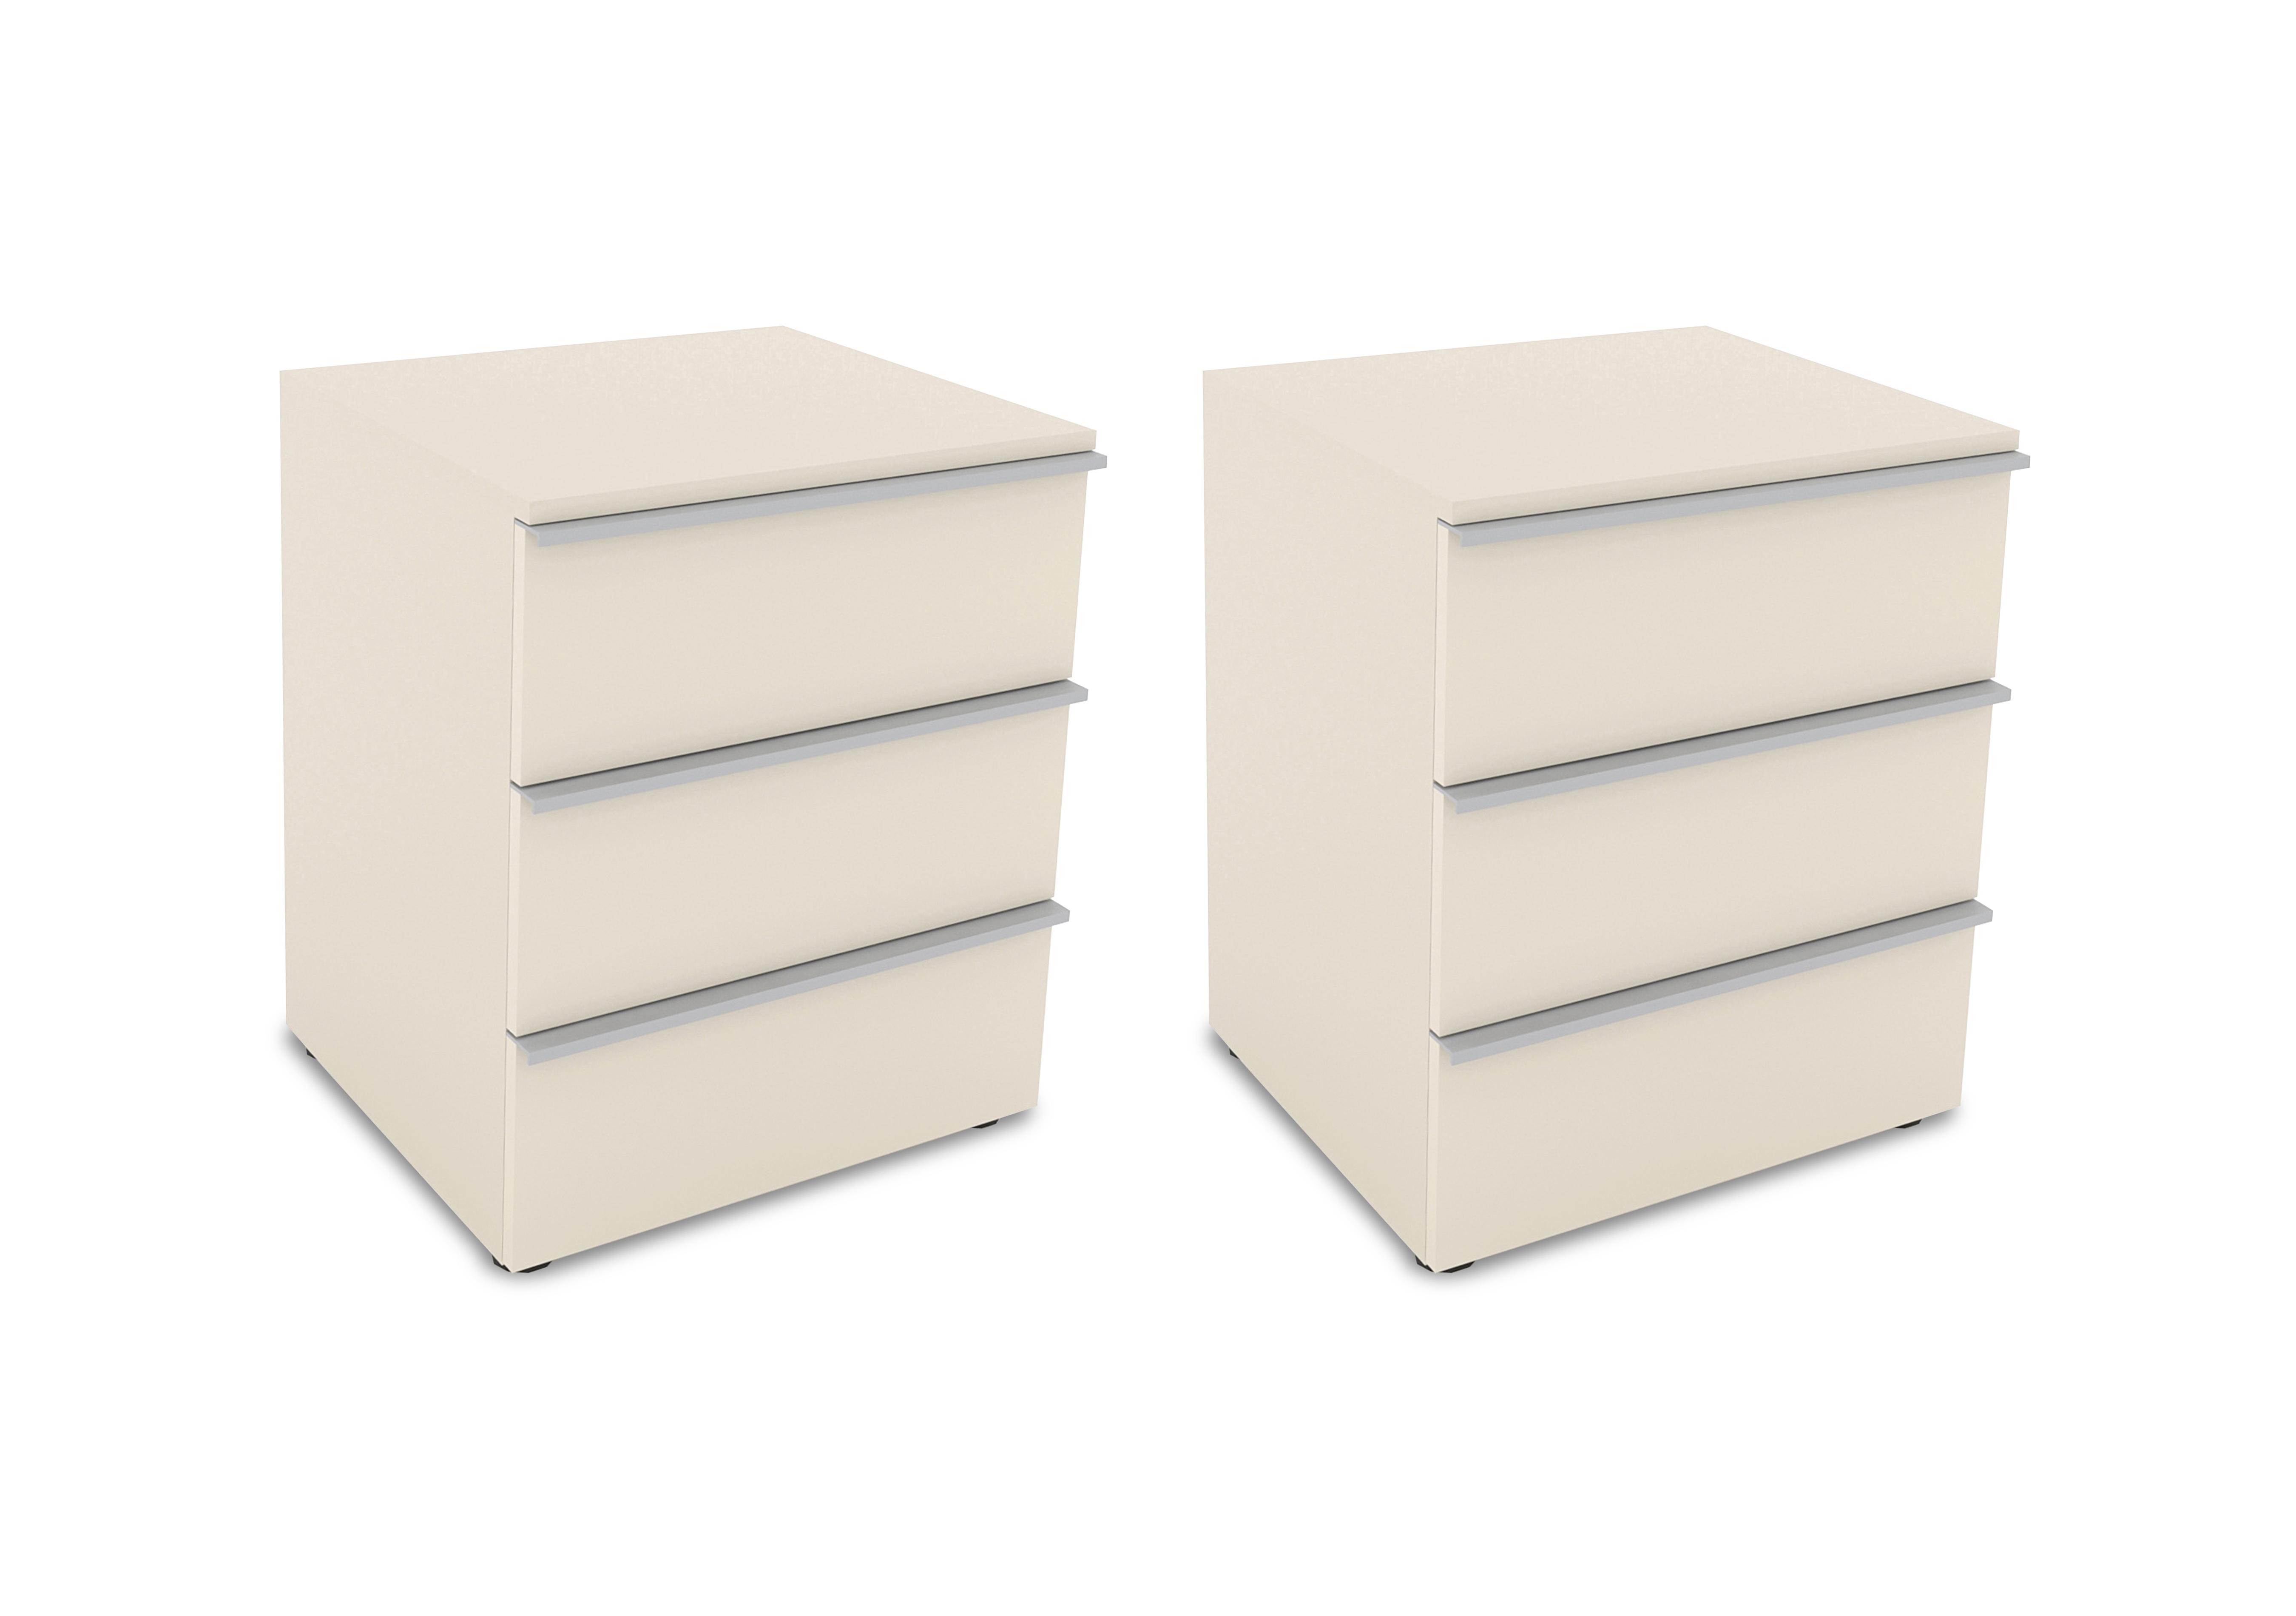 Cora Pair of 3 Drawer Bedside Cabinets in Perla on Furniture Village